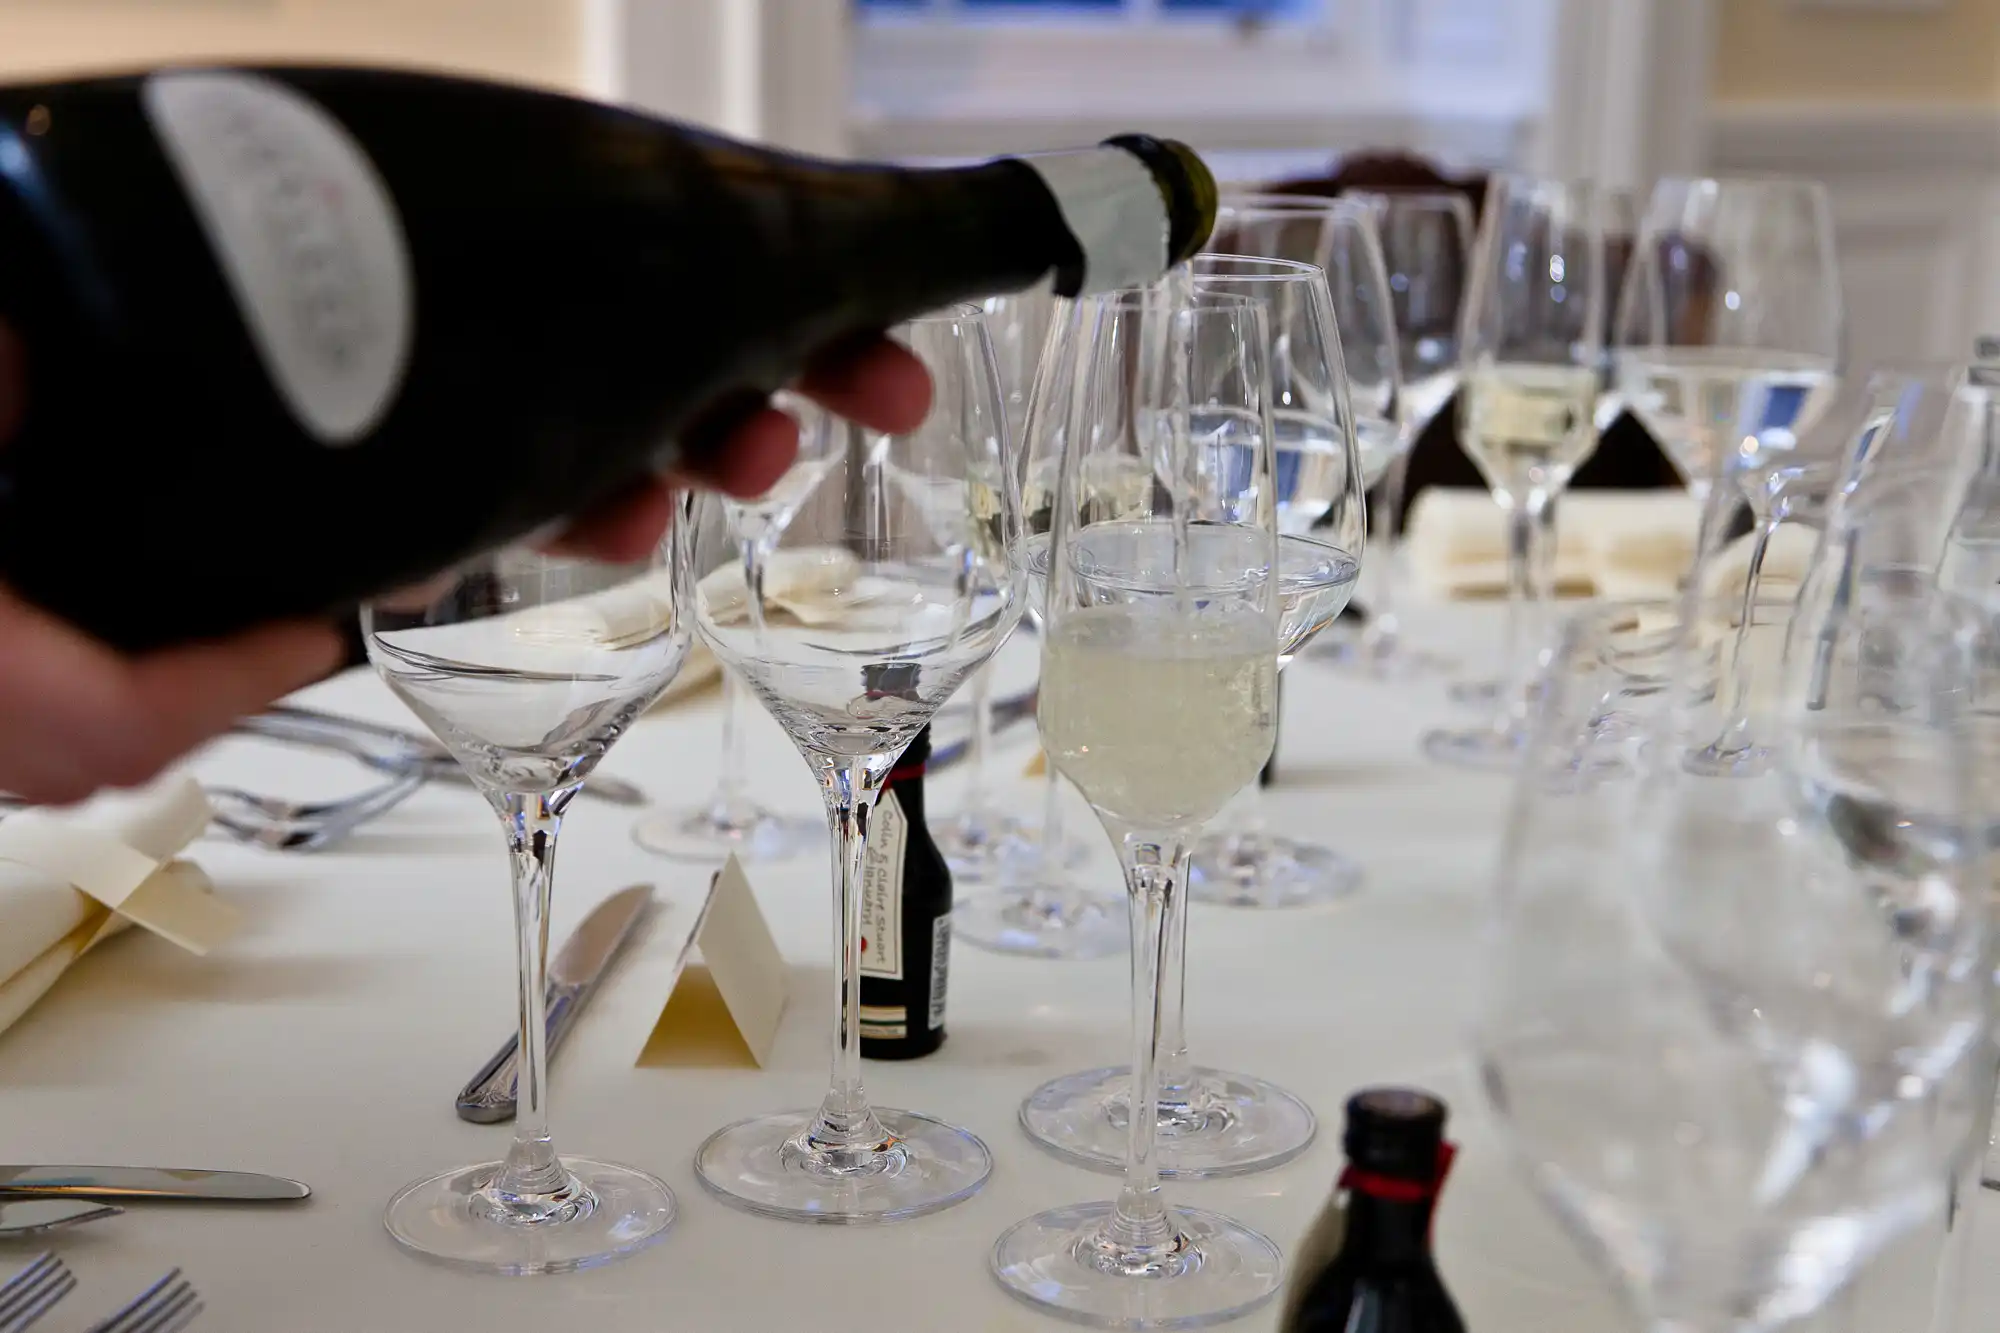 A person pouring champagne into flute glasses at a table set with multiple empty glasses and folded napkins.